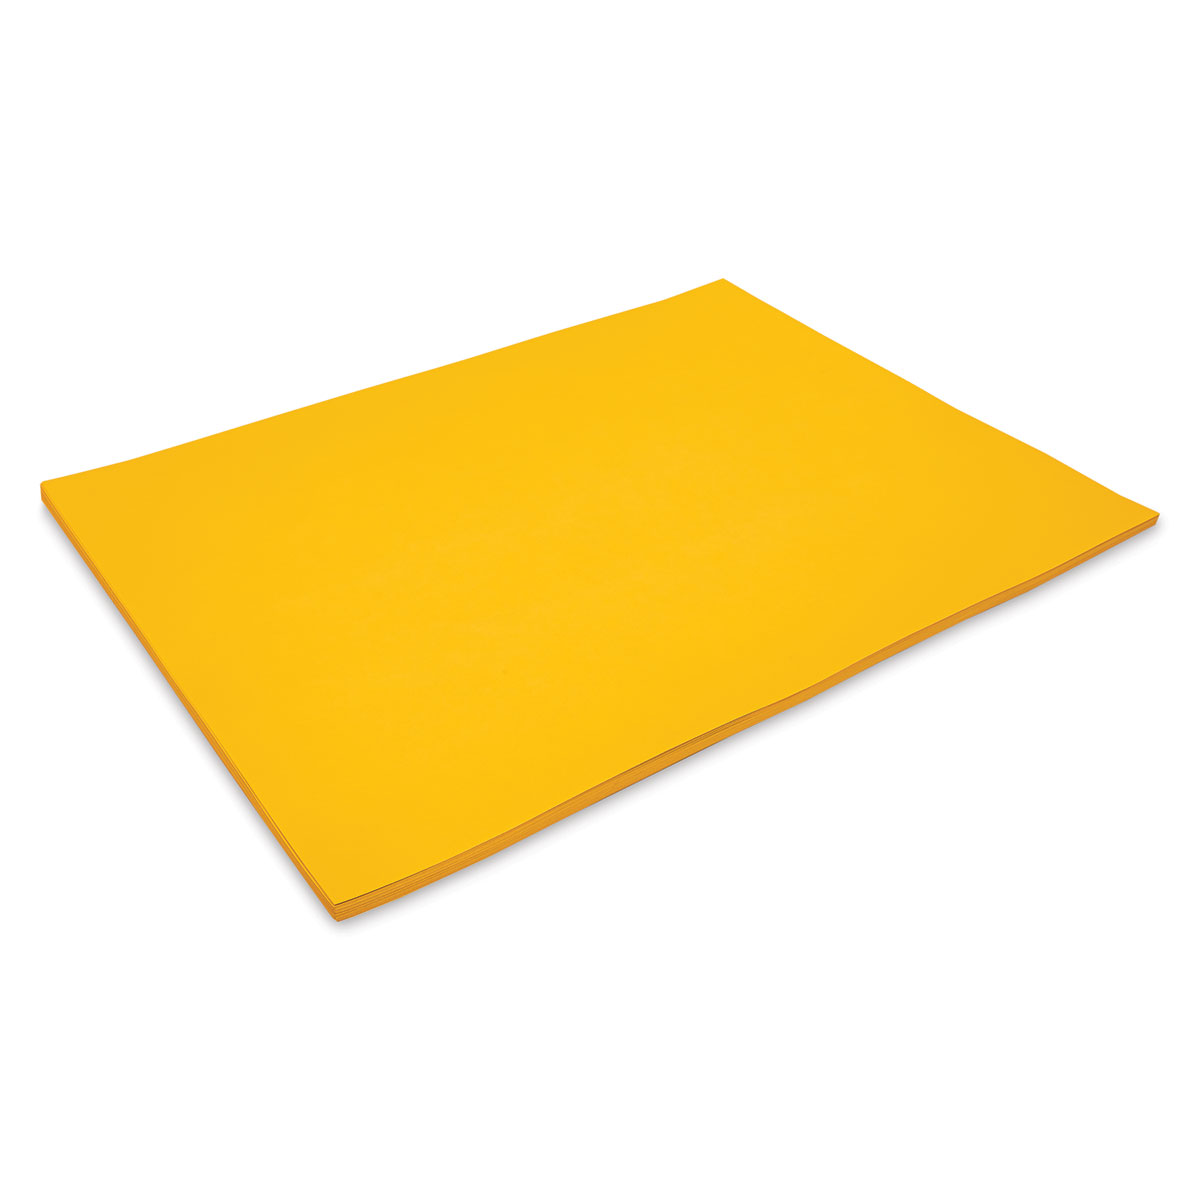 Pacon Tru-Ray Construction Paper - 9 x 12, Gold, 50 Sheets